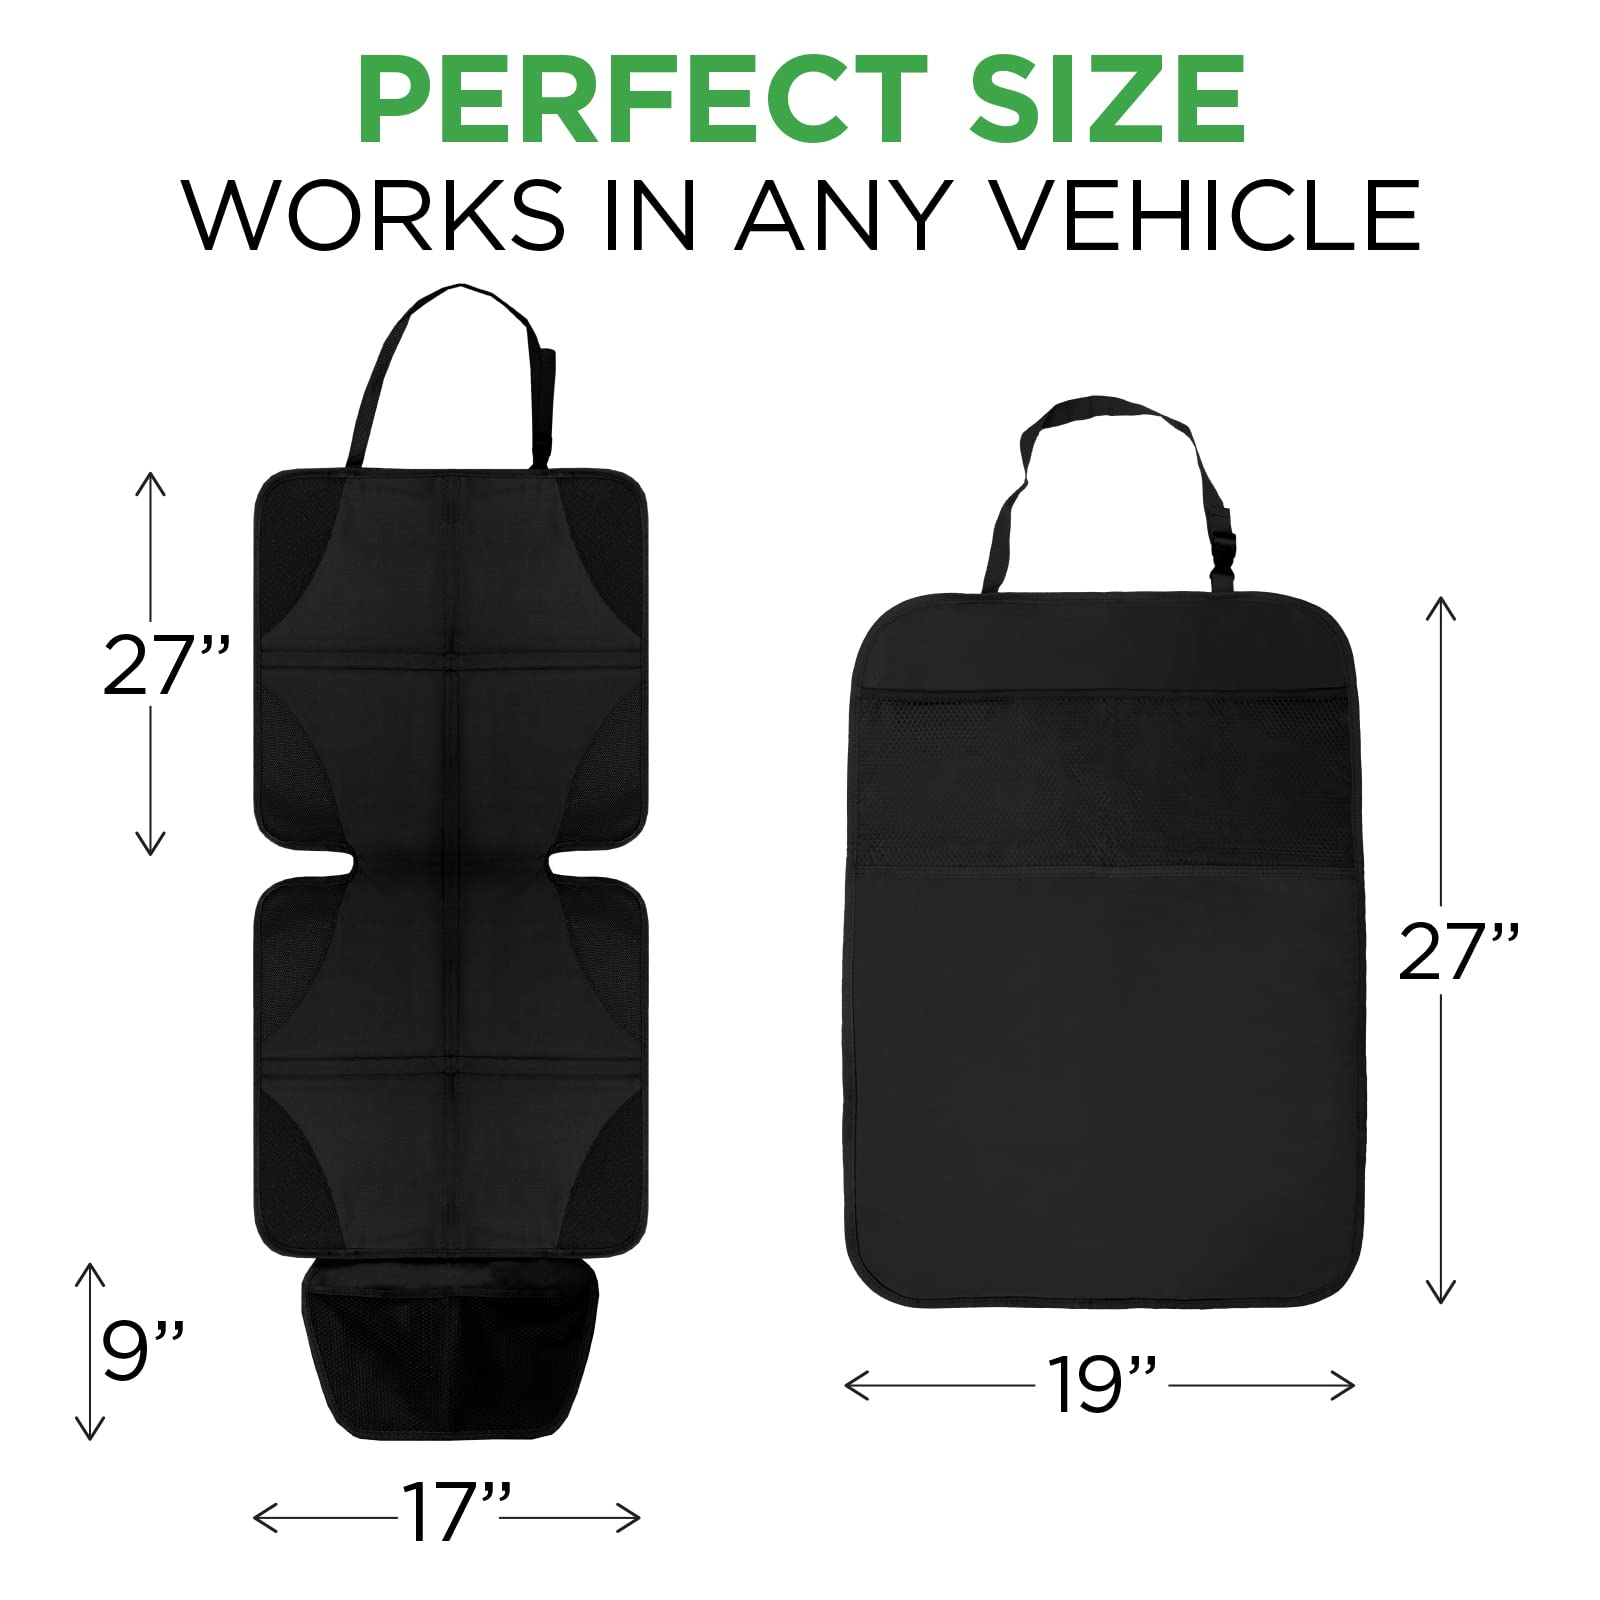 lebogner Car Seat Protector + Kick Mat Auto Seat Back Protector with 3 Organizer Pockets, Durable Quality Seat Covers + Waterproof Kick Guards to Protect Your Leather and Upholstery Seats from Damage